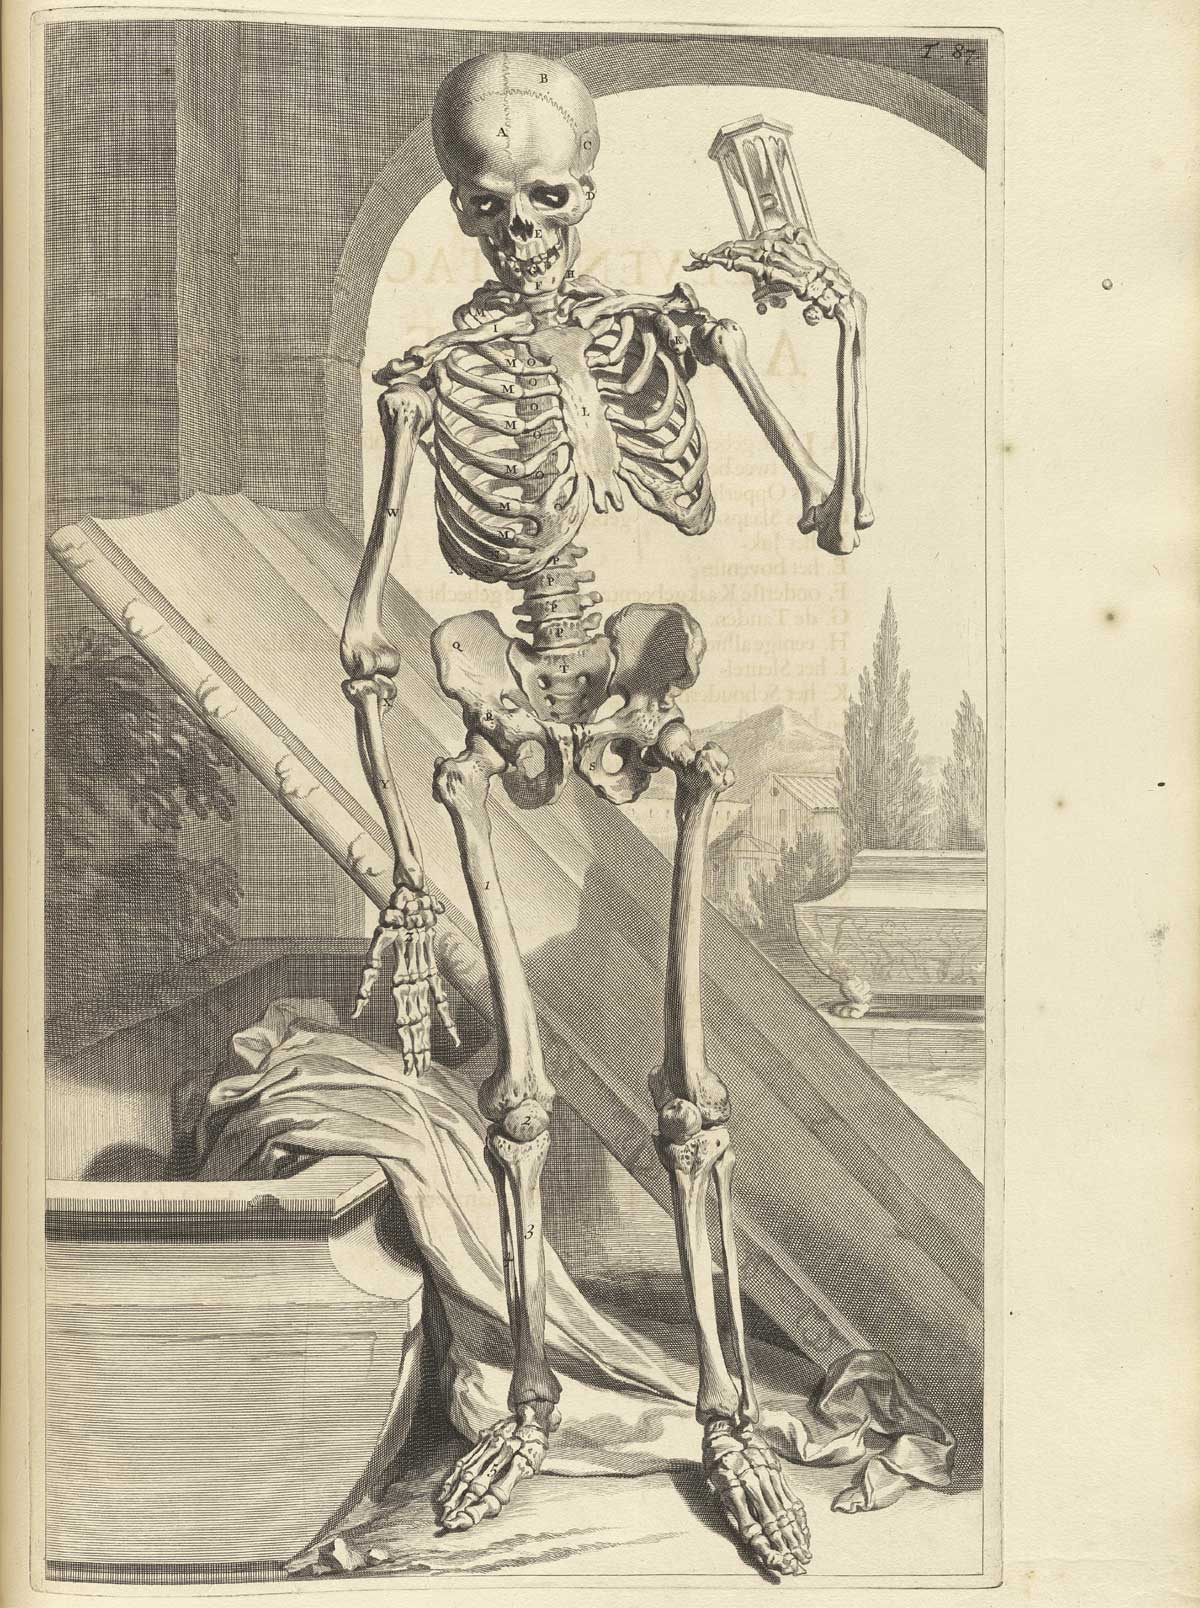 Engraving of a “memento mori” scene of a standing facing skeleton holding an hourglass in his left hand up in the air with an opened coffin behind him with a loose shroud tumbling out; Classical ruins are shown in the back with a wisp of a pastoral scene; from Govard Bidloo’s Ontleding Des Menschelyken Lichaams, Amsterdam, 1690, NLM Call no. WZ 250 B5855anDu 1690.